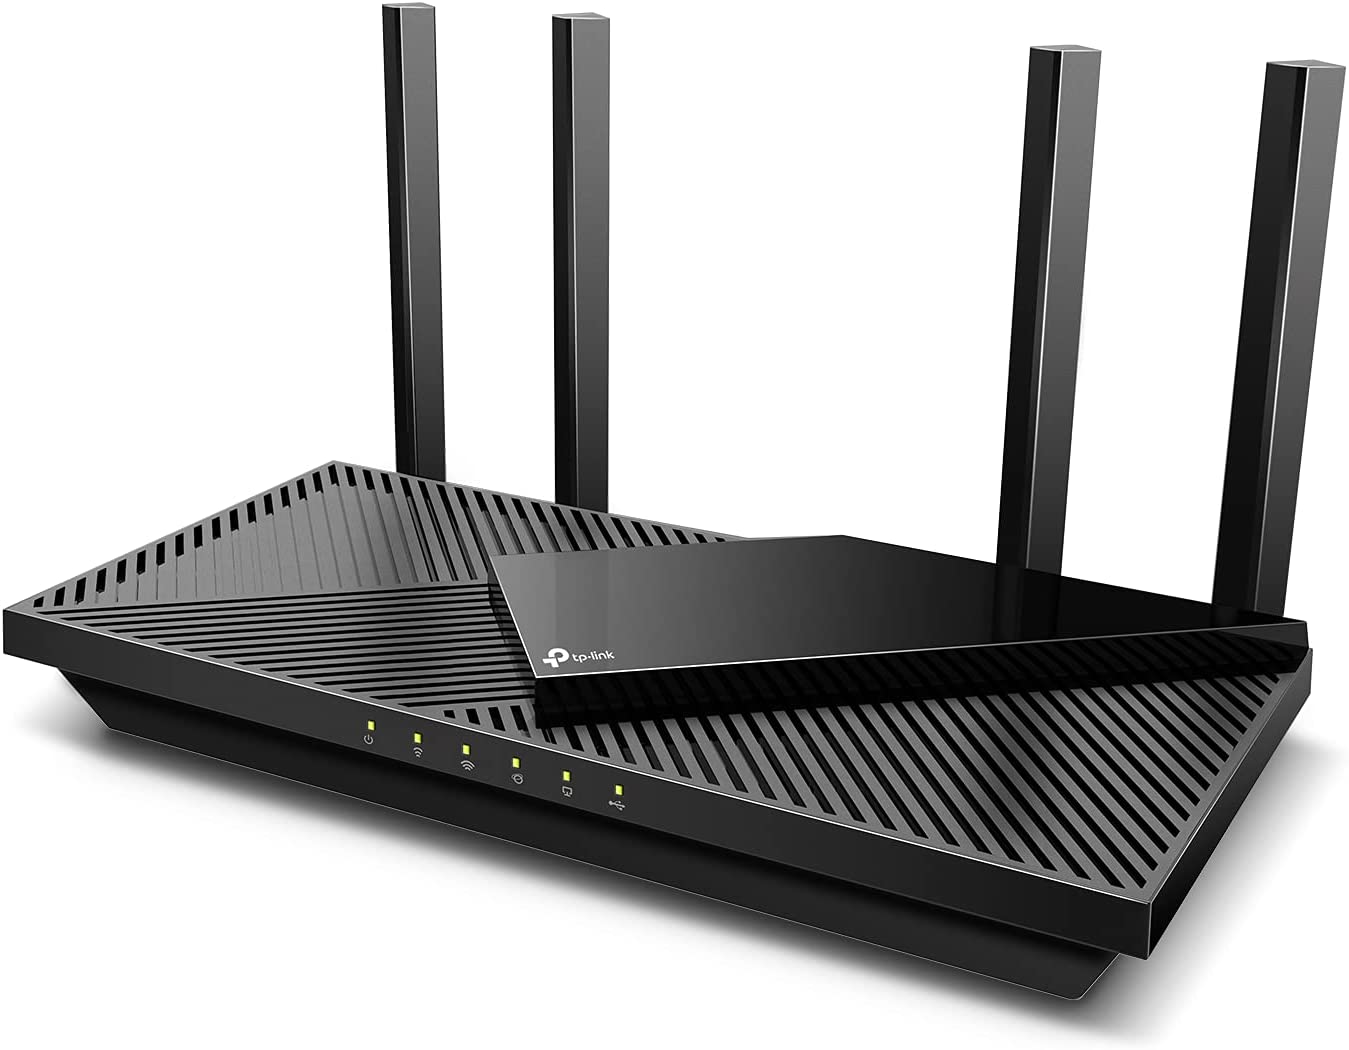 TP-Link WiFi 6 AX3000 Smart WiFi Router – 802.11ax Wireless Router (Archer AX55) - Amazon - $97.66 AC